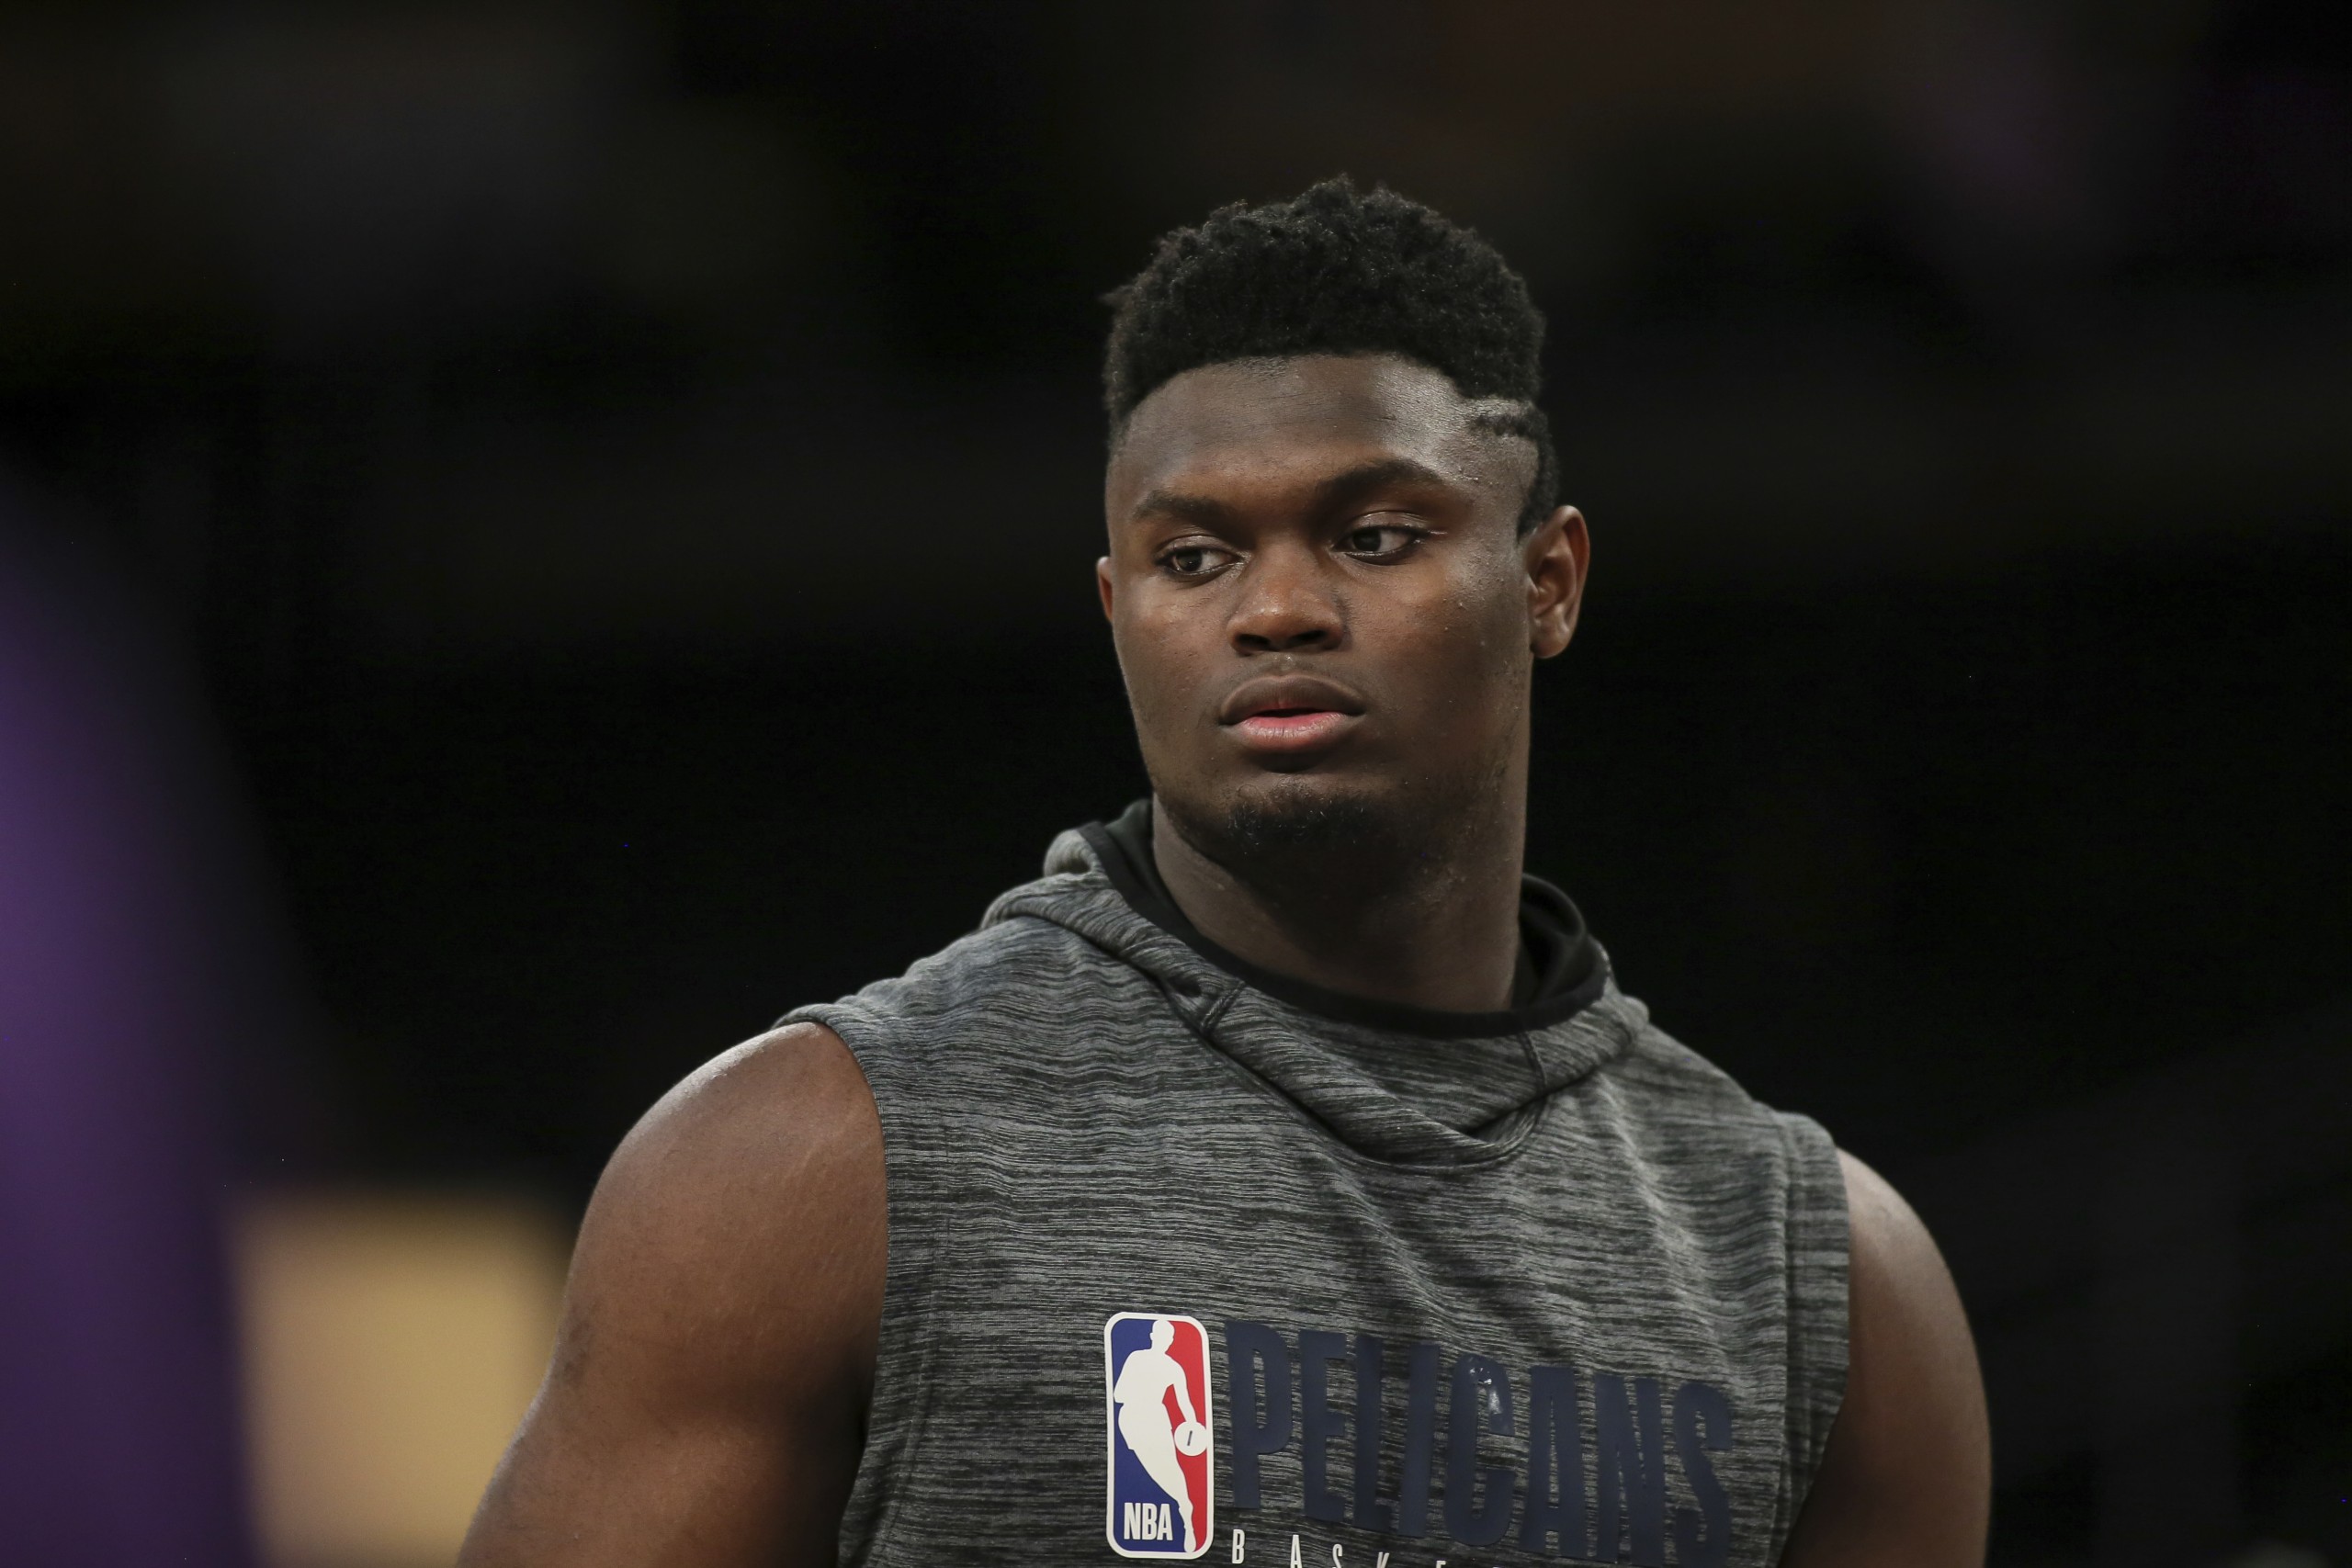 LOS ANGELES, CA - JANUARY 03: New Orleans Pelicans forward Zion Williamson (1) before the New Orleans Pelicans vs Los Angeles Lakers NBA basketball game on January 03, 2019, at Staples Center in Los Angeles, CA. (Photo by Jevone Moore/Icon Sportswire) (Icon Sportswire via AP Images)